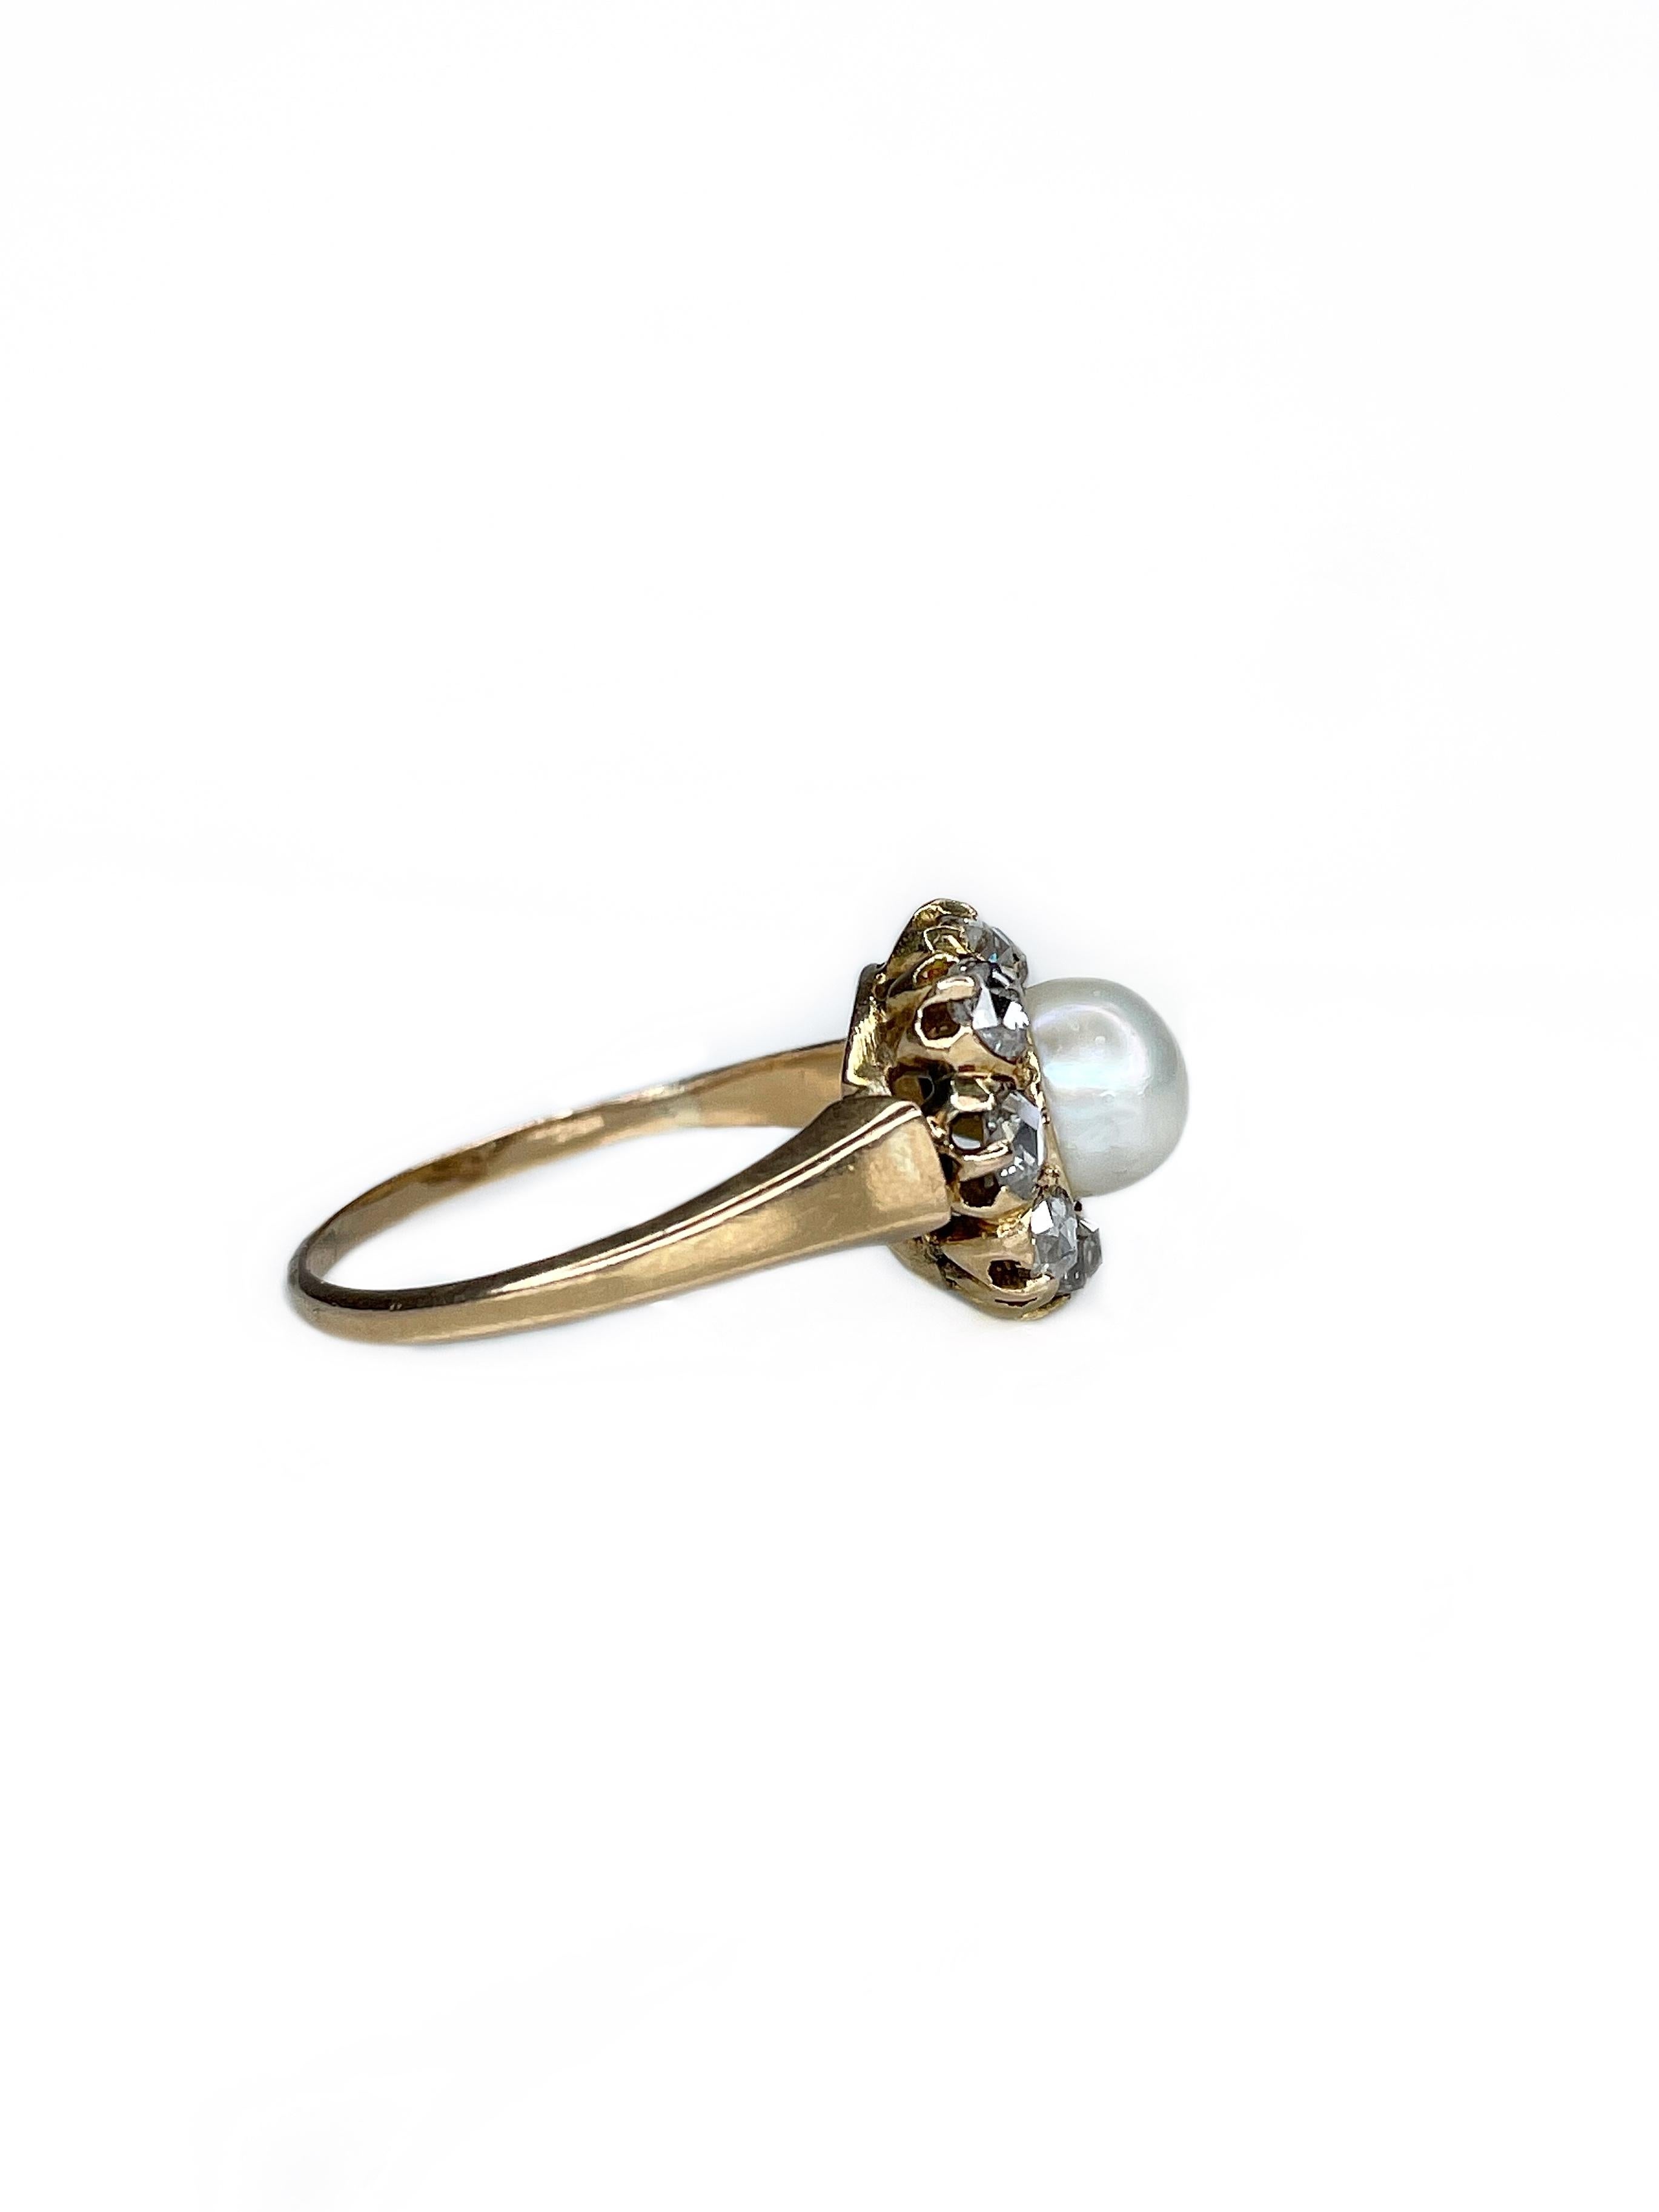 This is a magnificent sparkle antique cluster ring crafted in 18K yellow gold. It features 6mm width cultured pearl and 8 rose cut diamonds (0.40ct, G, VS). 

The piece has a subtle elegant touch and adorable look. 

Weight: 3.46g
Size: 17.25 (US